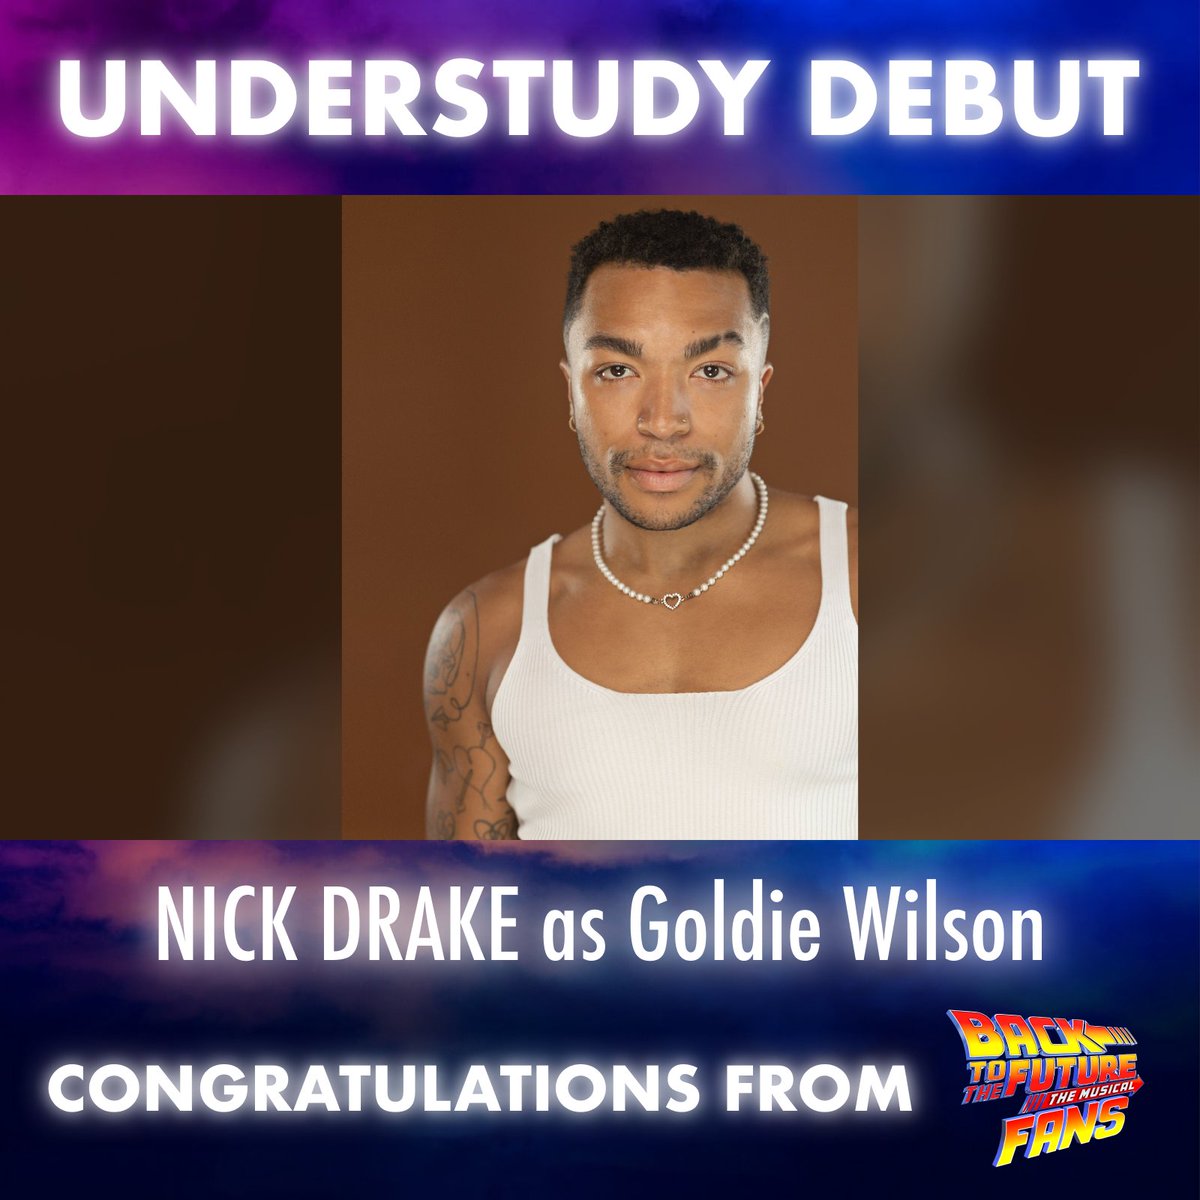 They’re gonna CLEAN UP this town! 🧹

We hope Hill Valley is ready… cos Nick Drake will be making their #Broadway principal #debut as #GoldieWilson and #MarvinBerry in @BTTFBway at the Winter Garden Theatre this evening and we like the sound of THAT! ⚡️

Break a leg, Nick! 💙